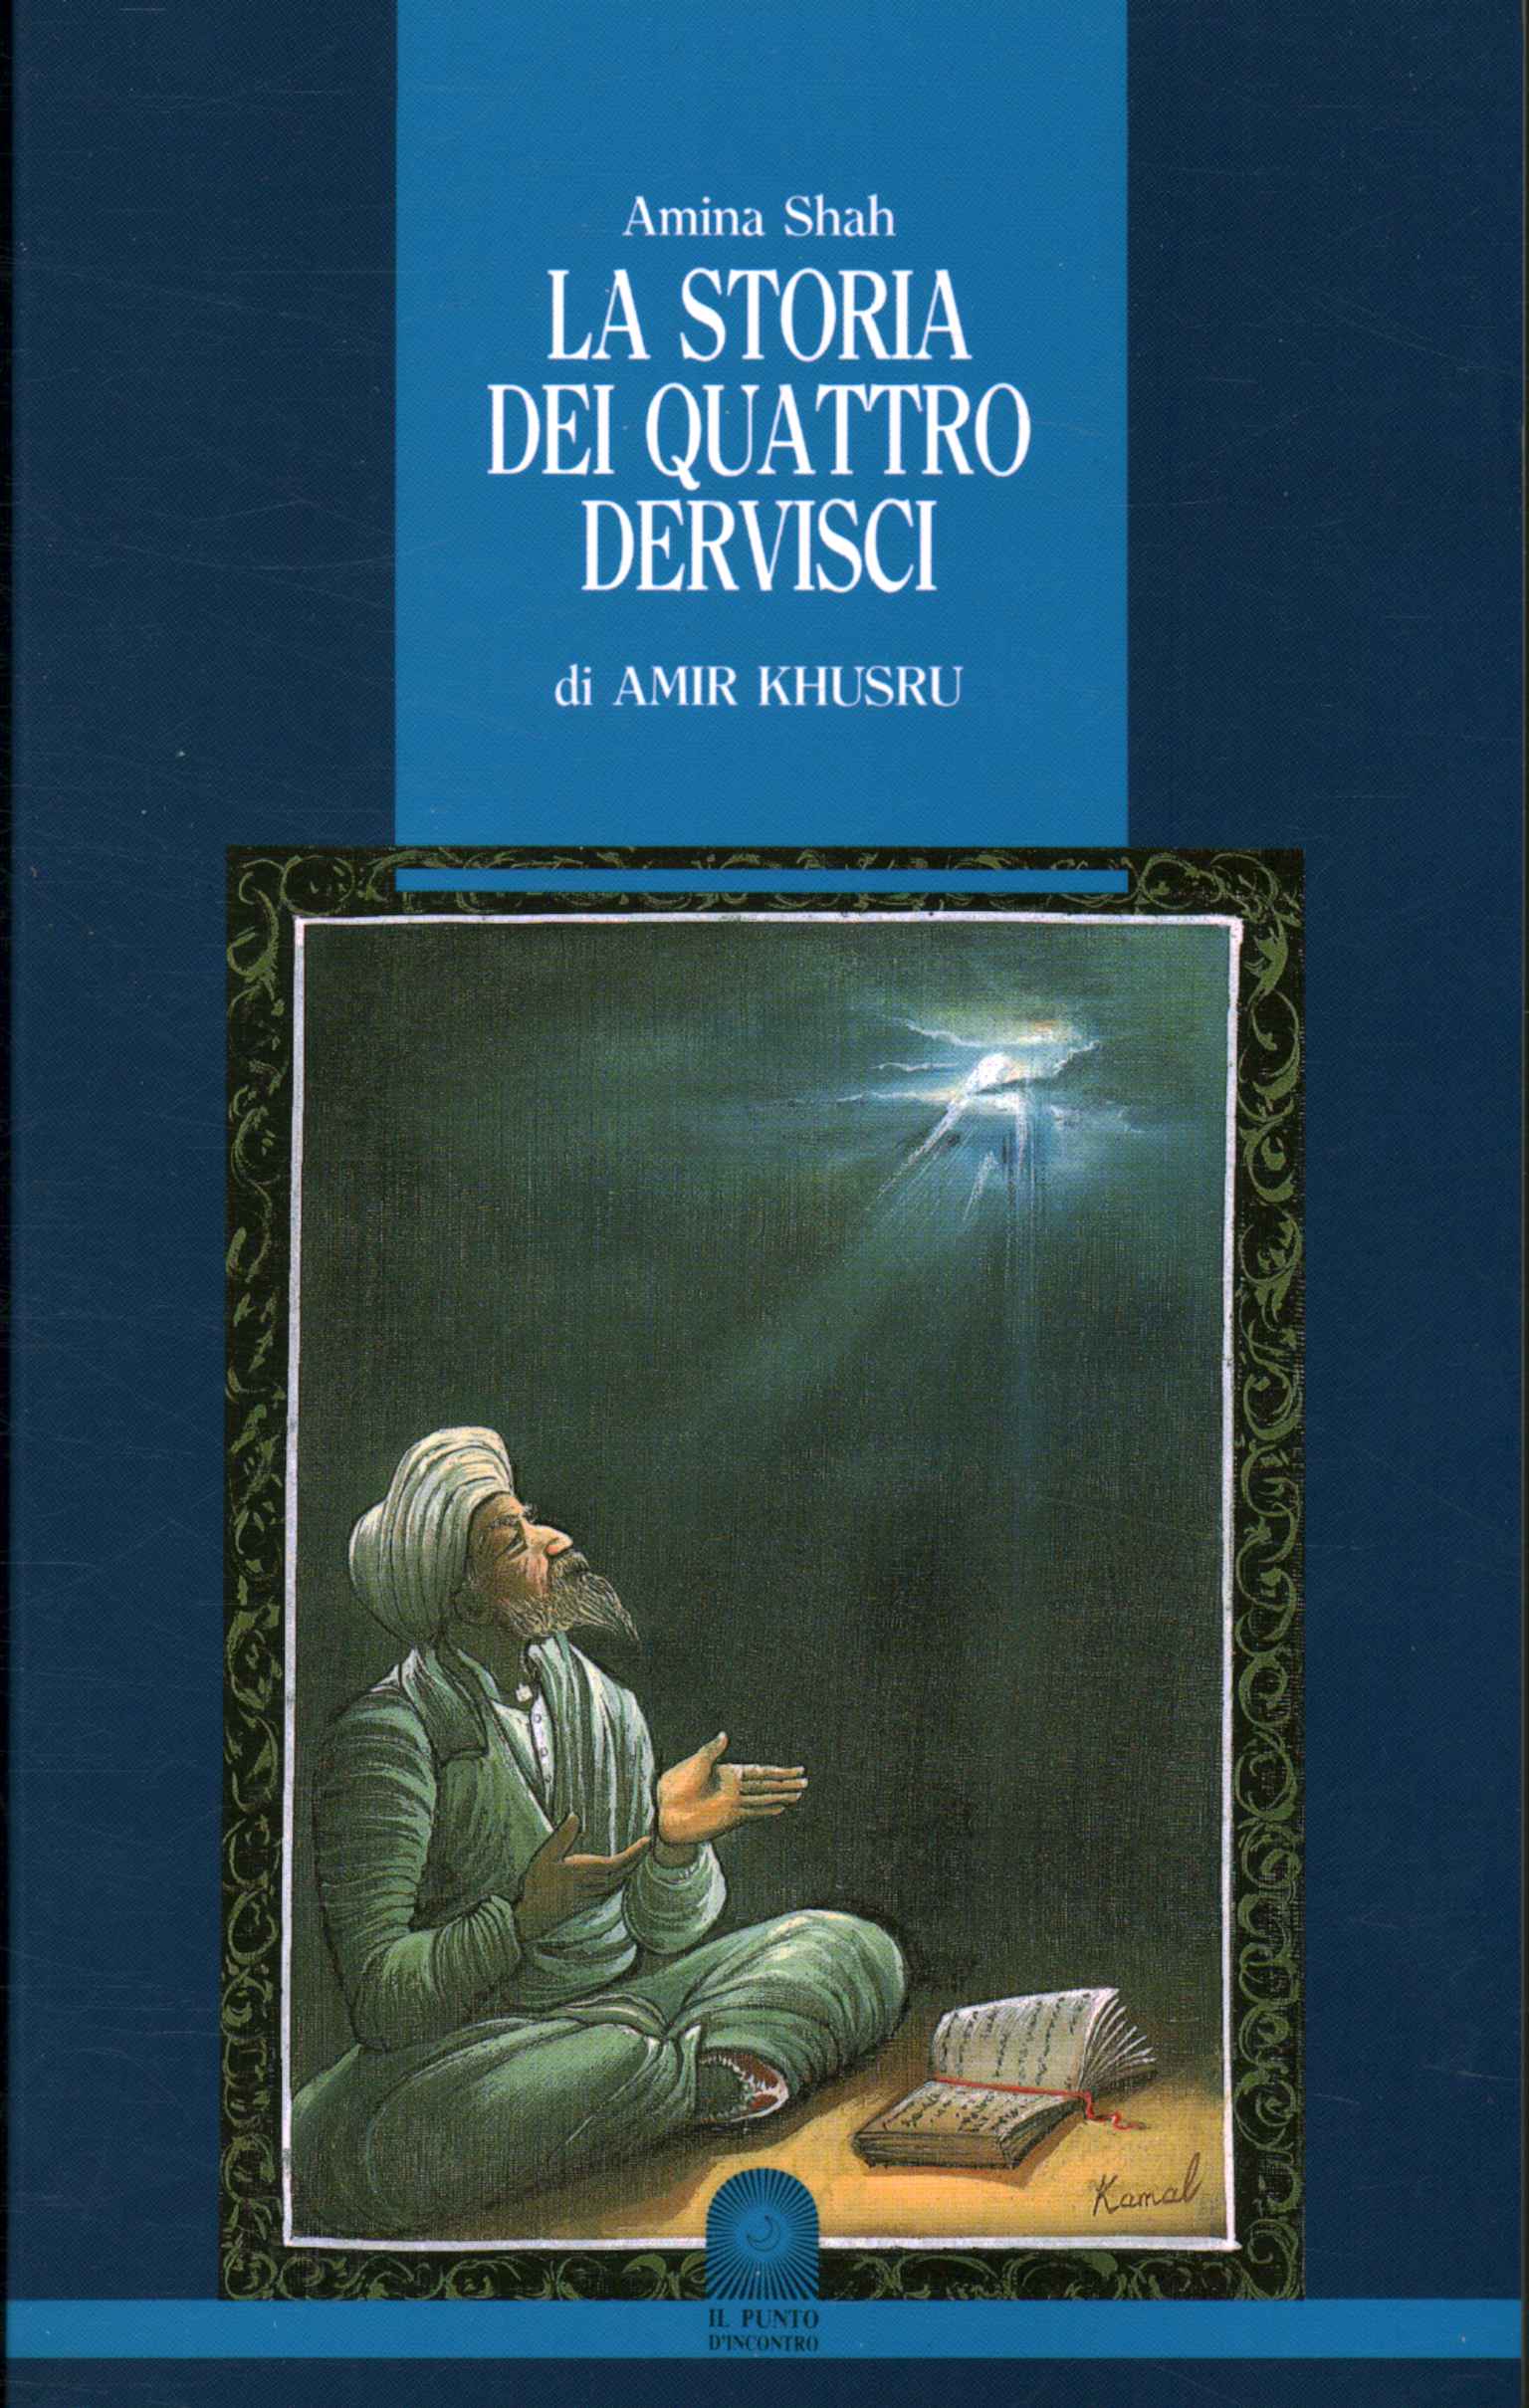 The story of the four dervishes